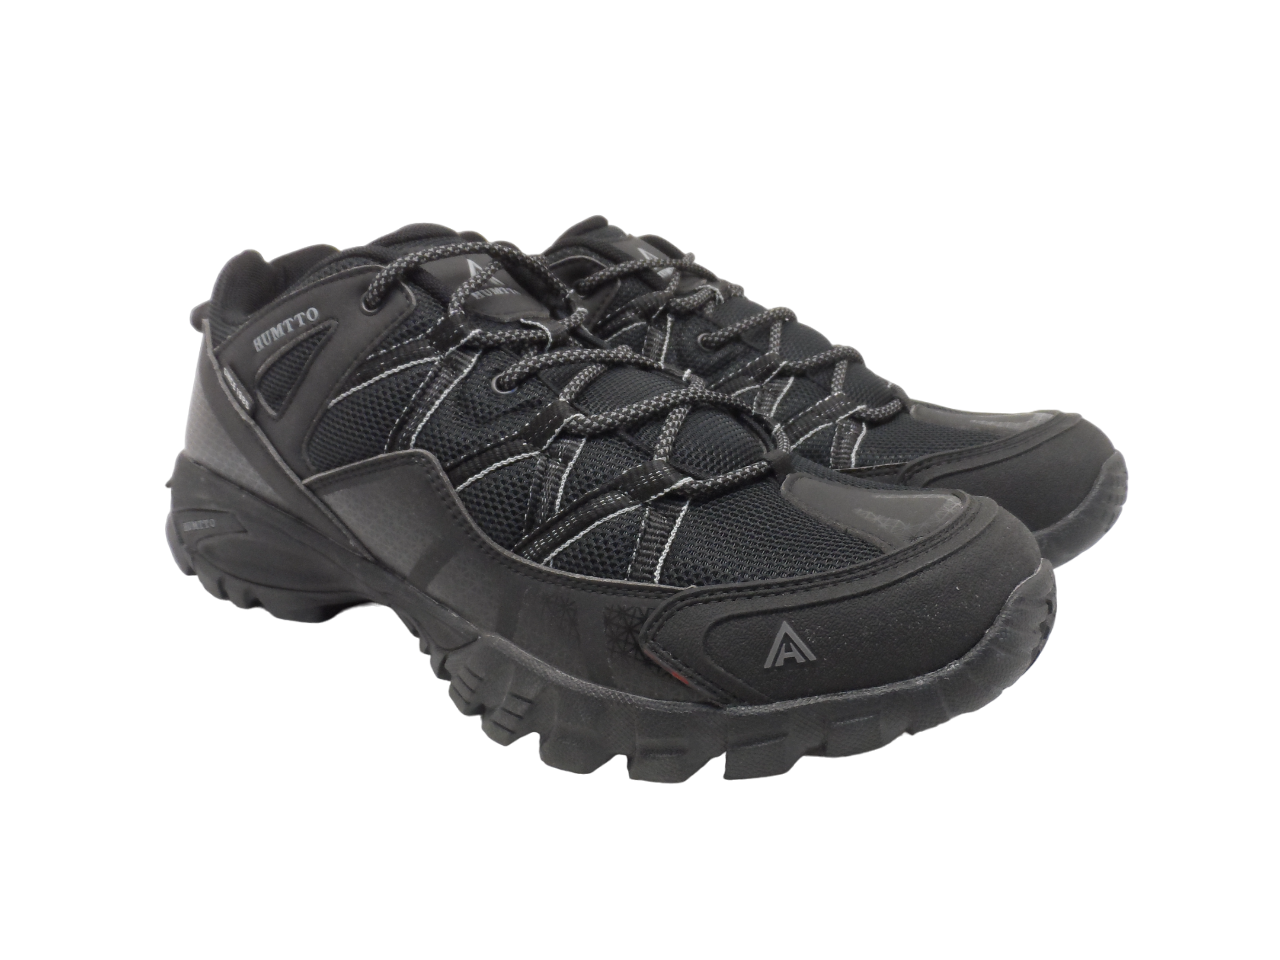 Primary image for Humtto Men's Low-Cut Athletic Trail Hiking Shoes 110609A-3 Black/Black Size 12M